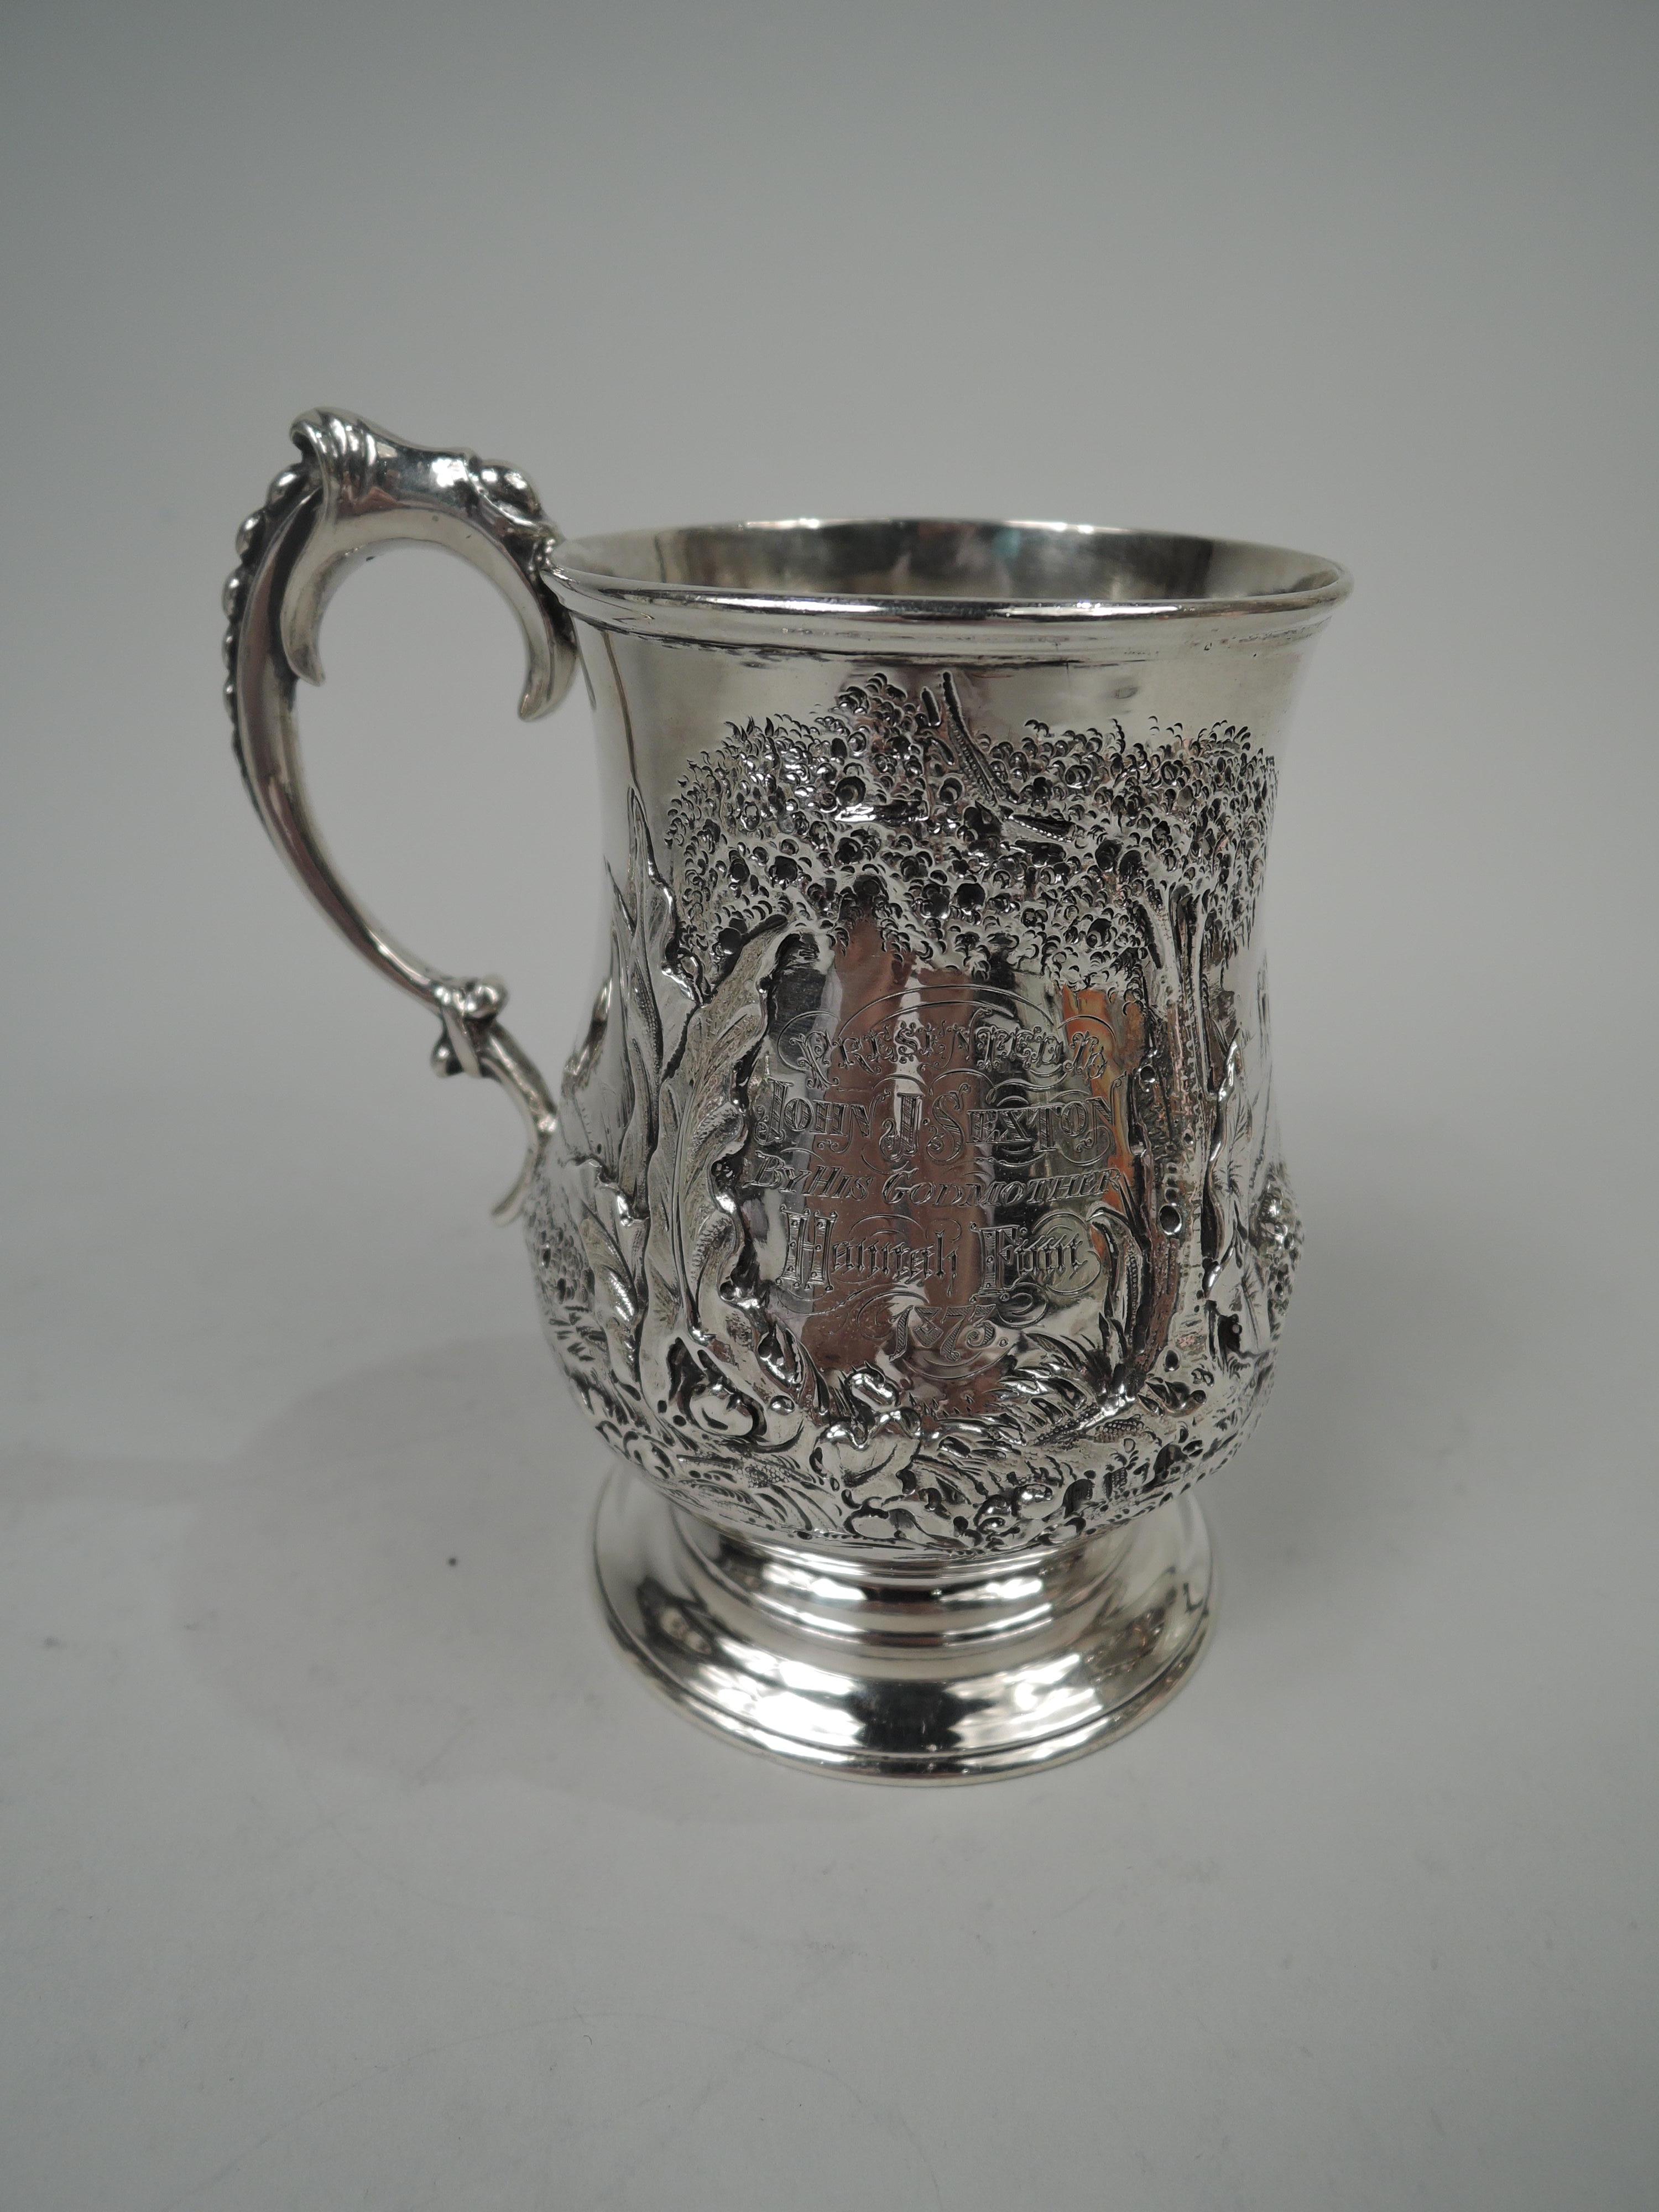 Victorian sterling silver baby cup. Made by Robert Harper in London in 1871. Baluster bowl on raised foot; wrapped and bracketed double-scroll handle with graduated beading. Chased and engraved scene from Robinson Crusoe: In the foreground stands